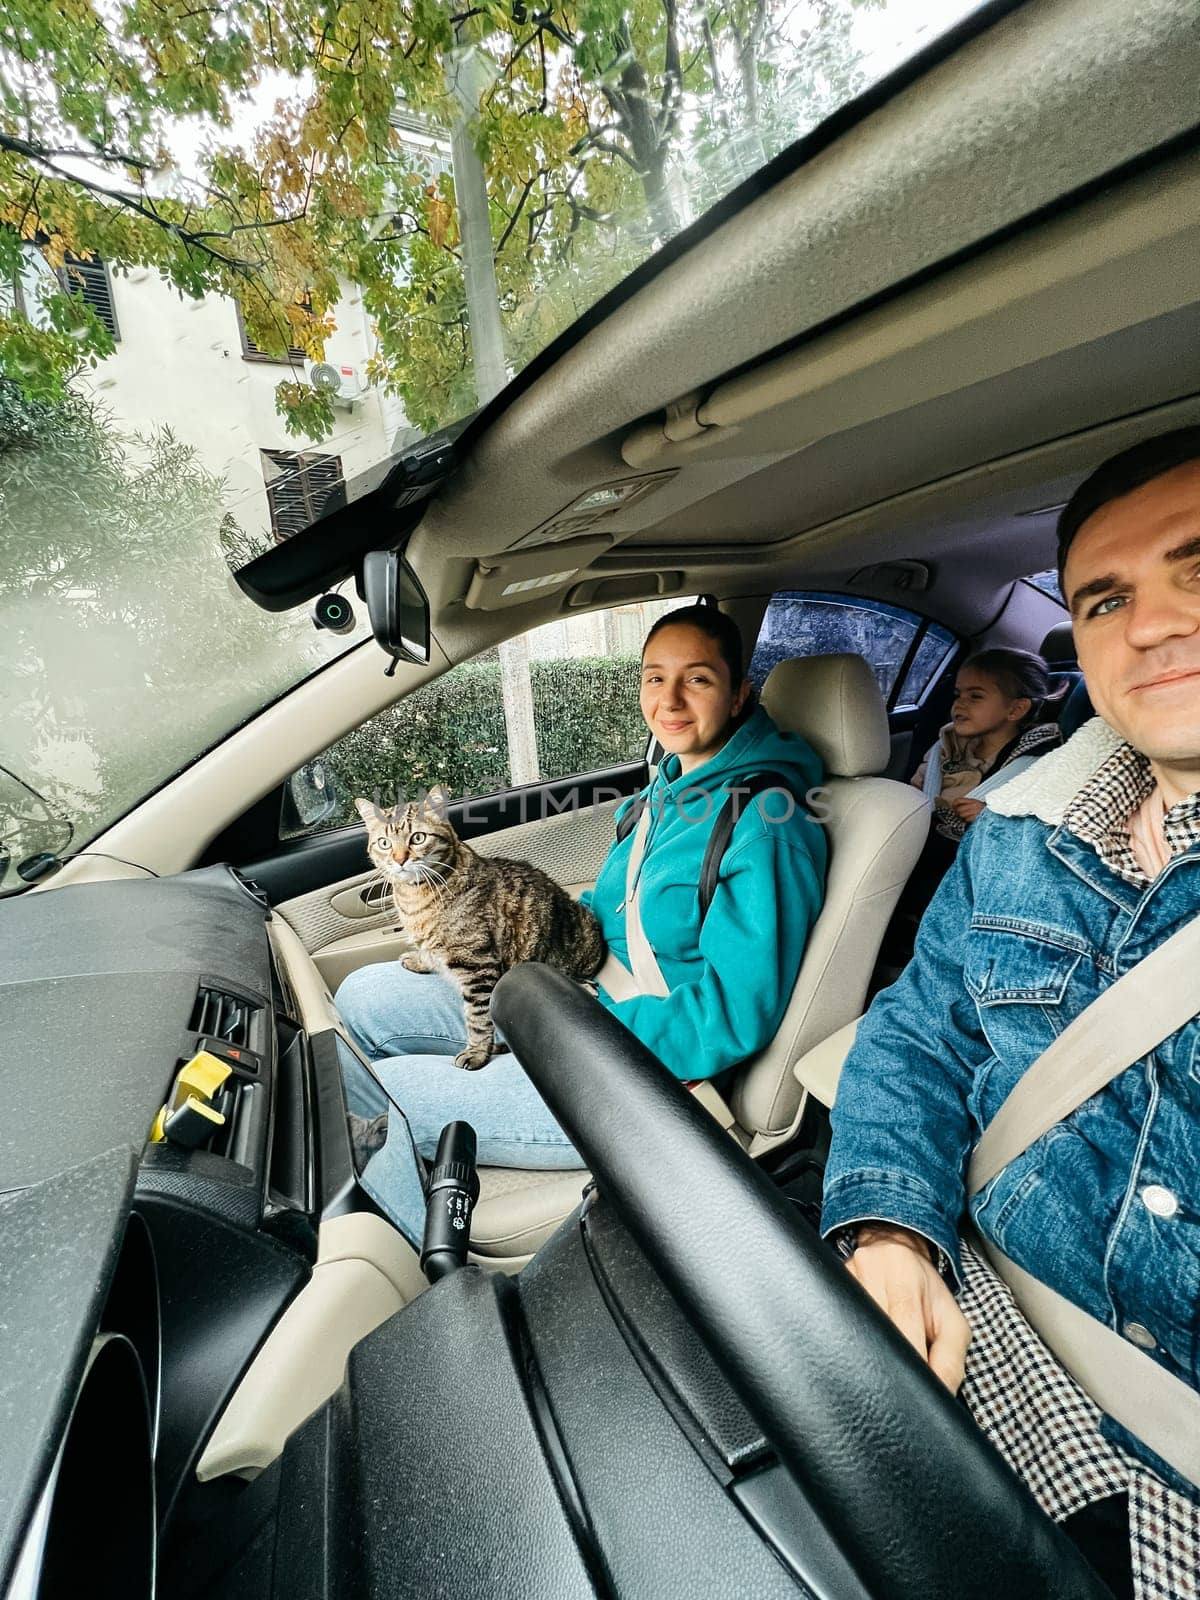 Mom, dad and a little girl are riding in a car with a cat by Nadtochiy